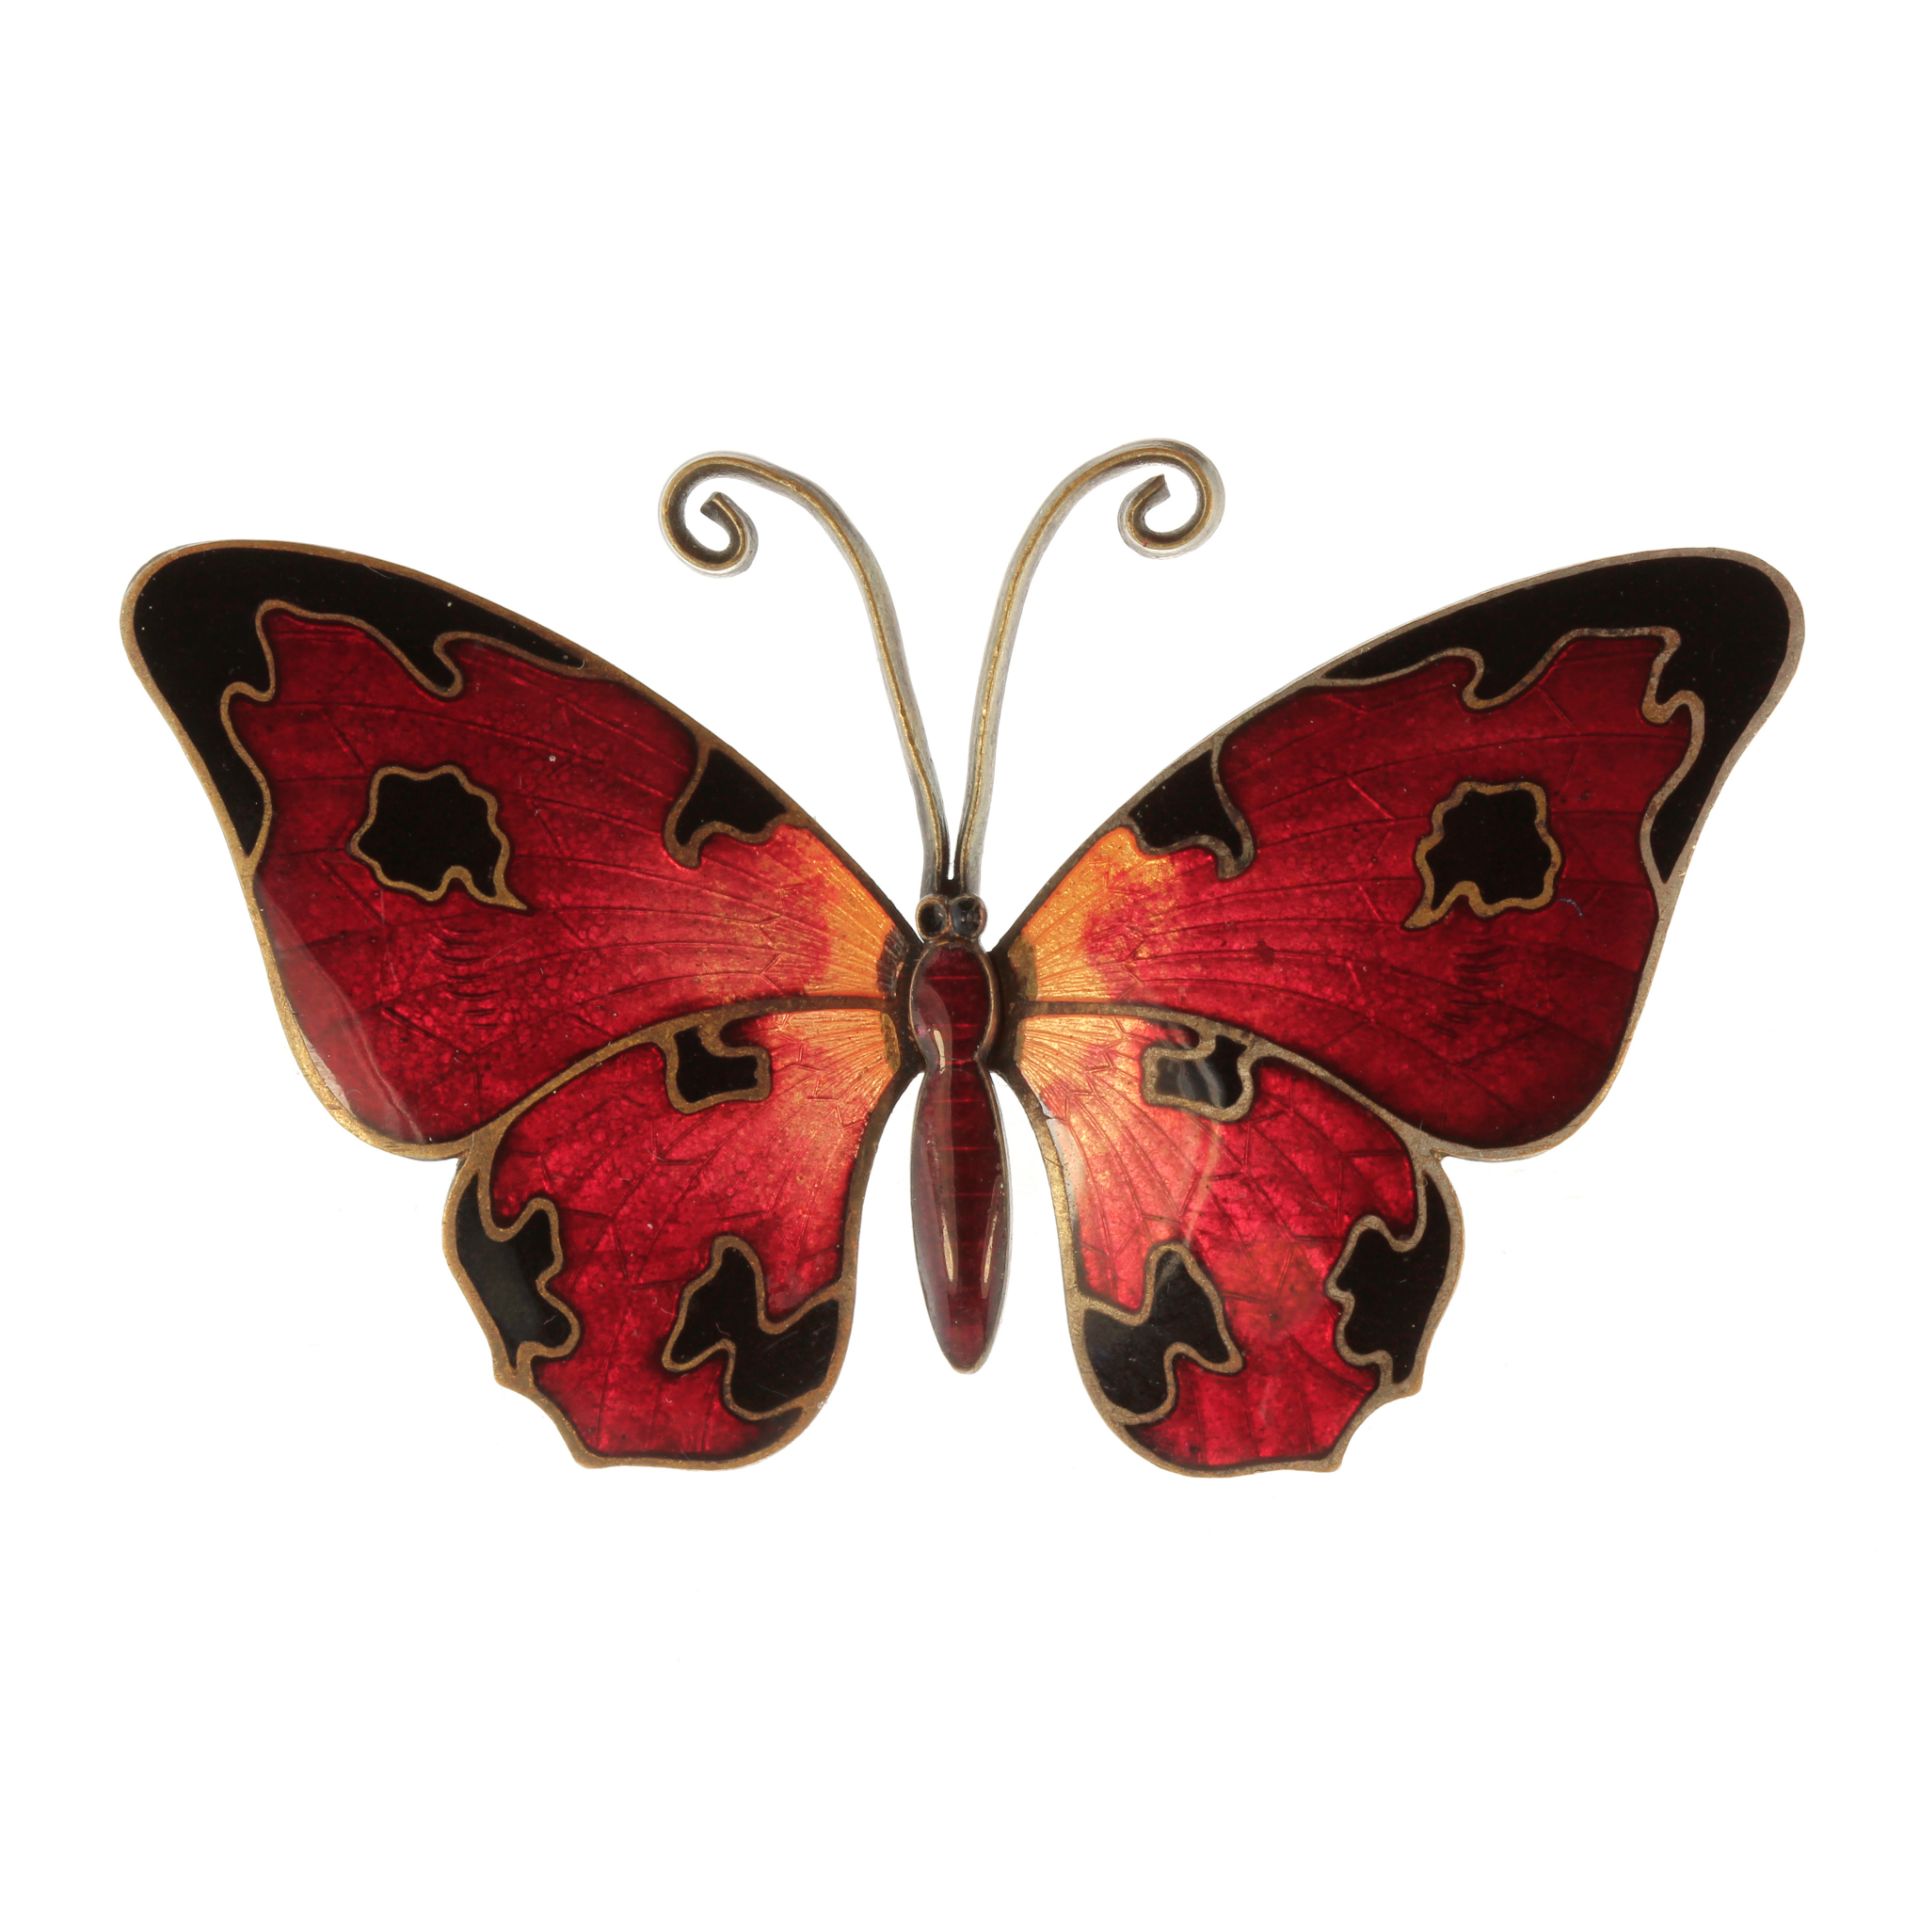 An antique enamel butterfly brooch the body and wings decorated in various shades of red and black